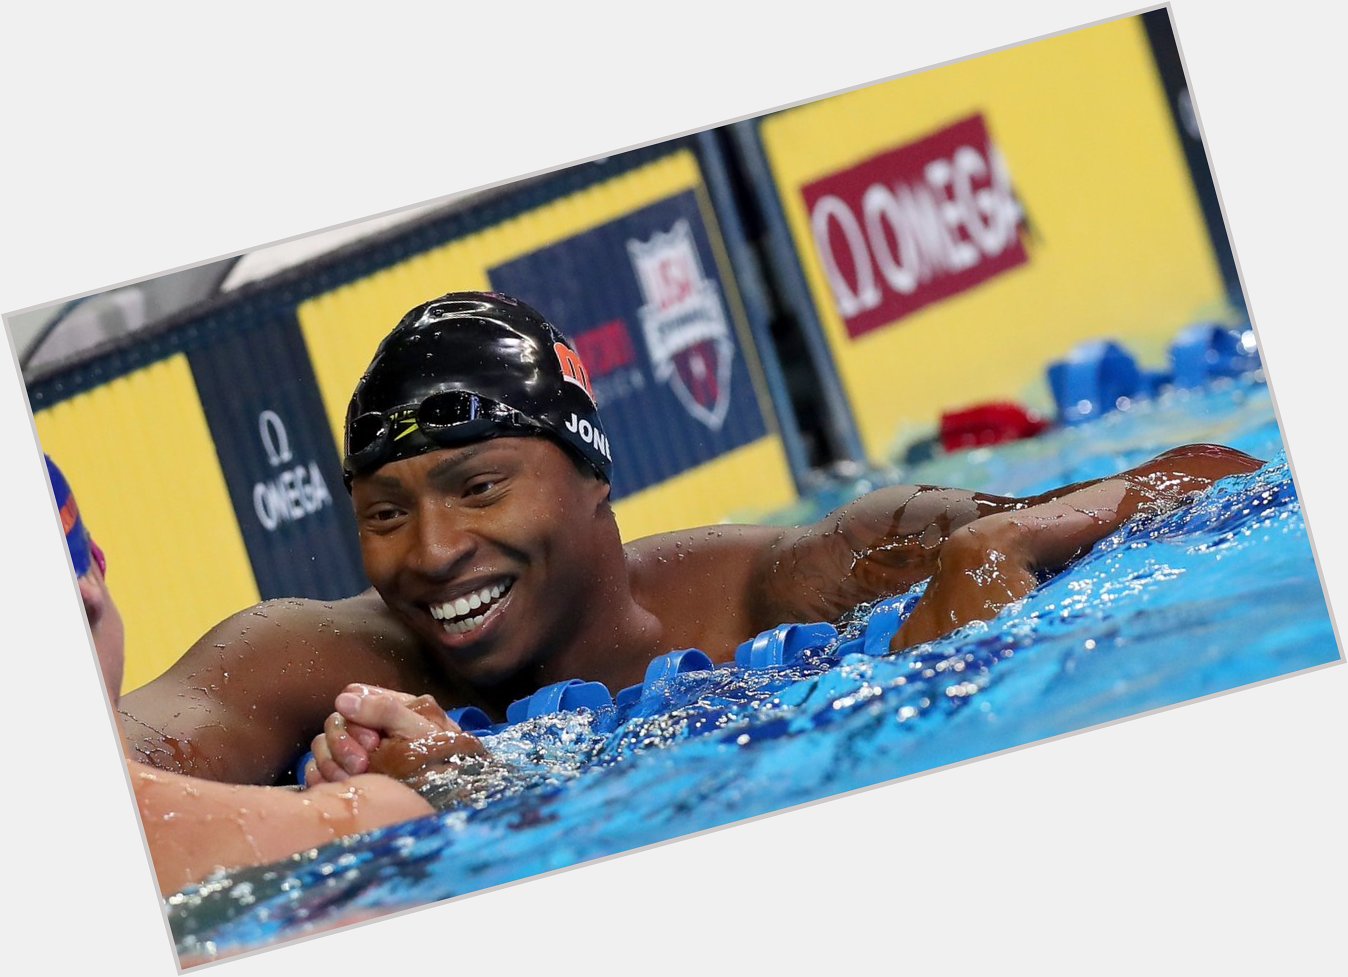 Happy birthday to 2x Olympian, 4x medalist (and leap year baby) Cullen Jones! 